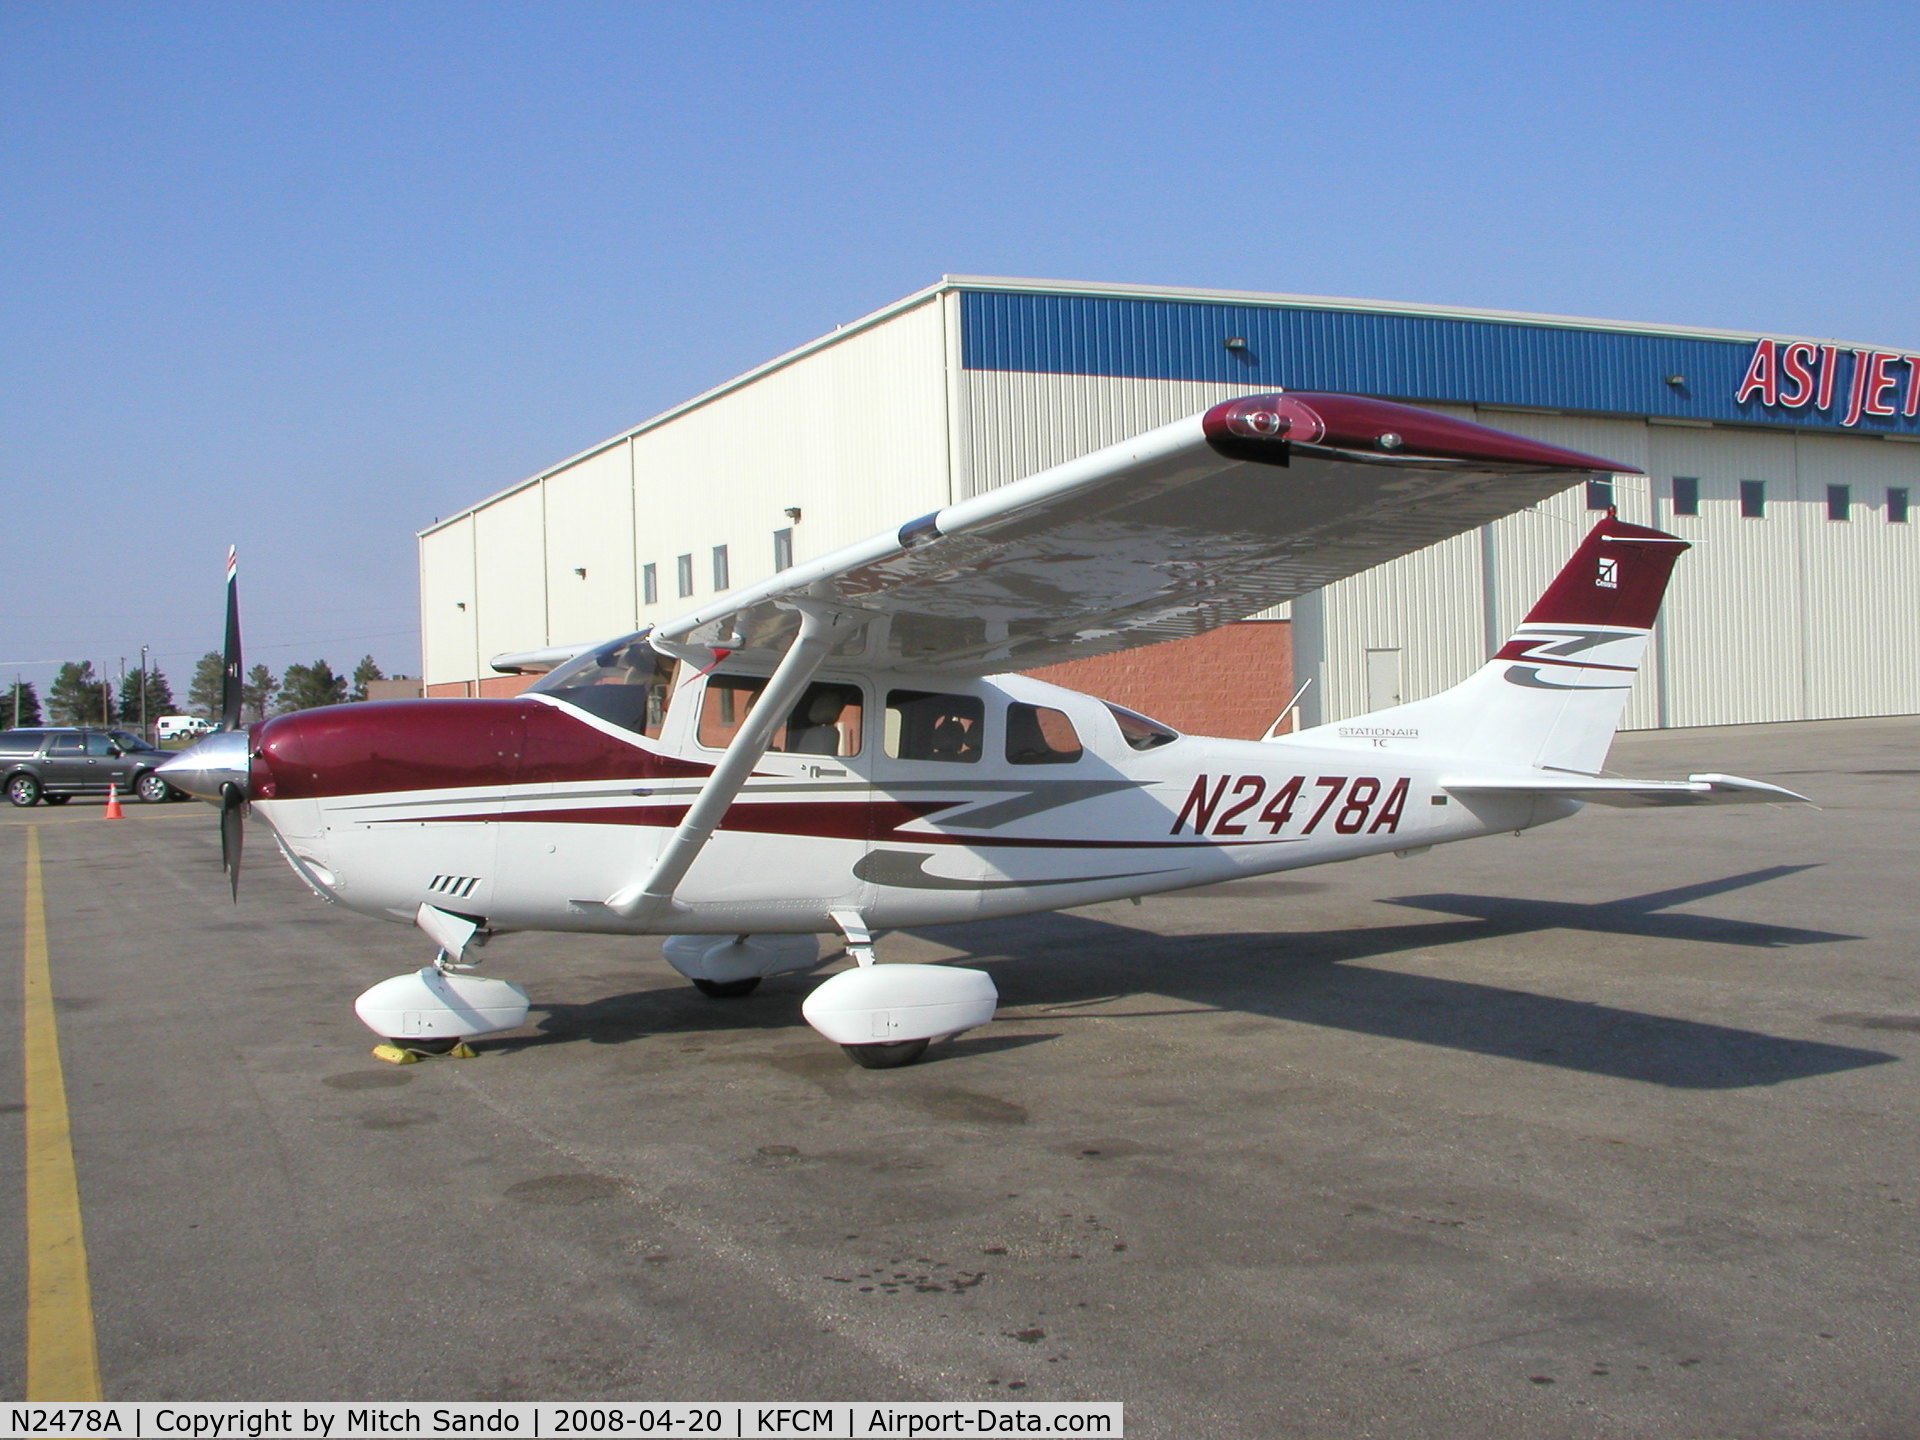 N2478A, 2007 Cessna T206H Turbo Stationair C/N T20608763, Parked on the ramp at ASI Jet Center.